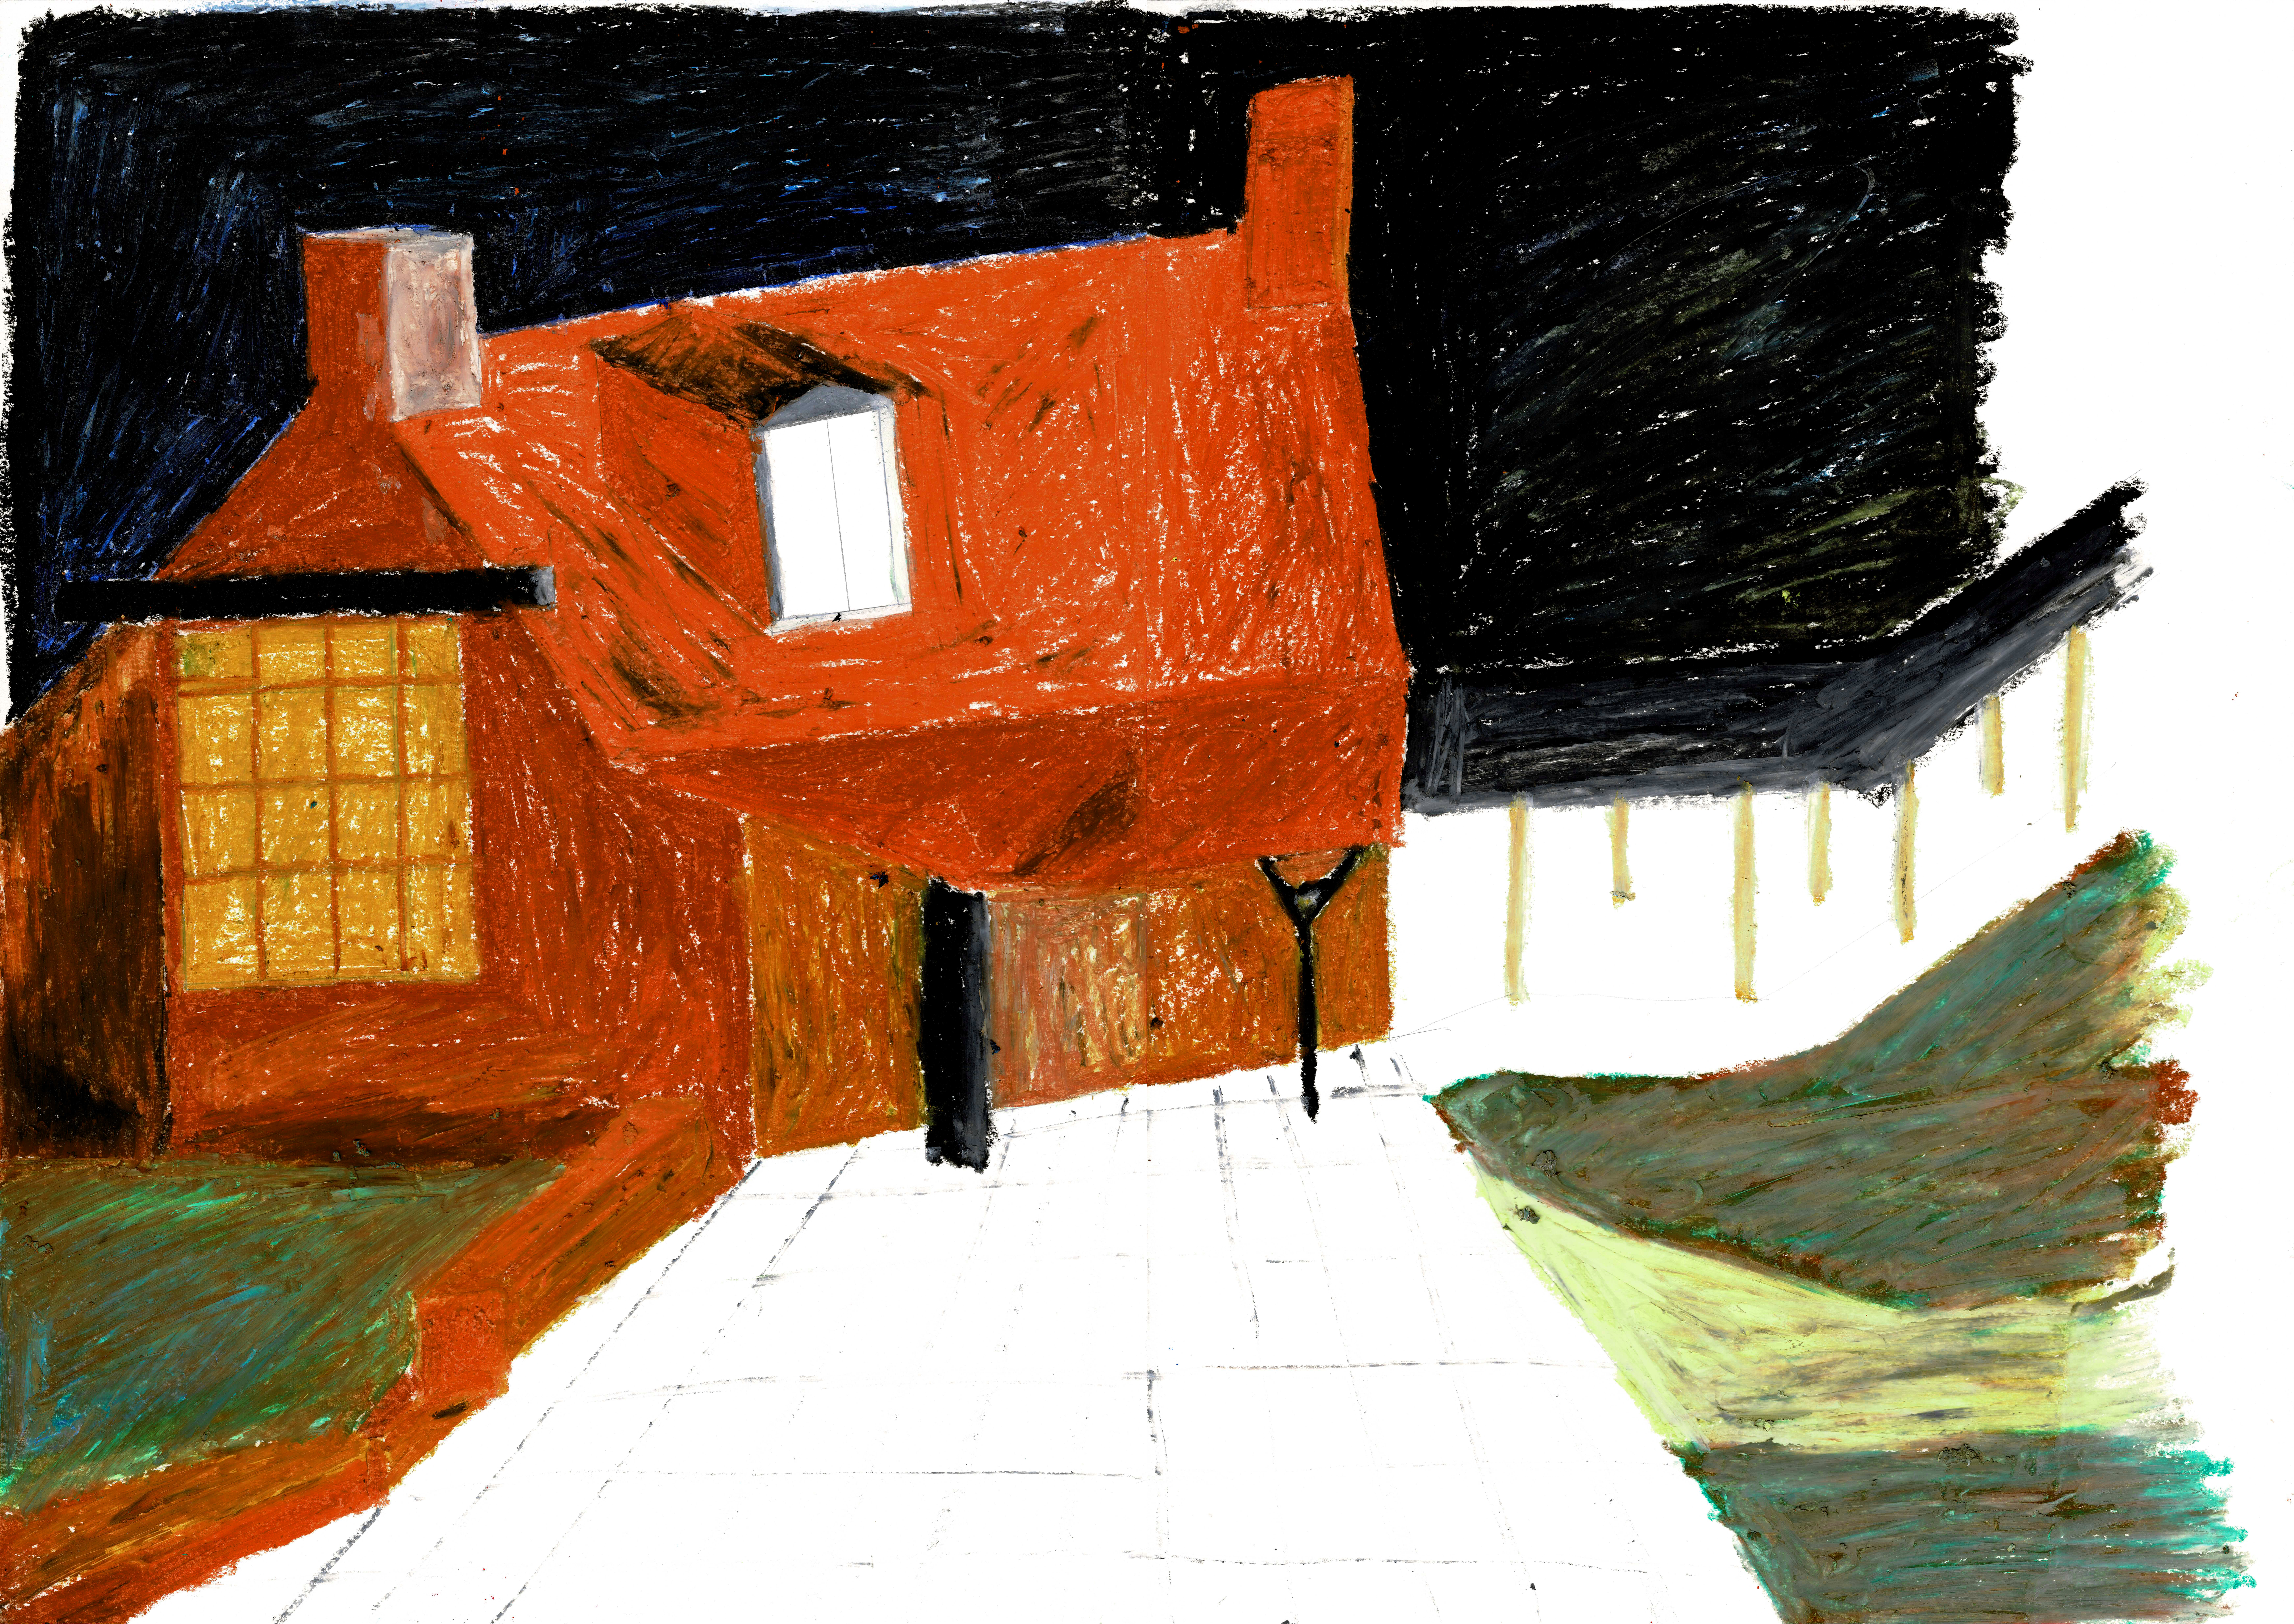 pastel drawing of a barn with a single dormer, two chimneys, a large factory window at one end, and mismatched columns under a porch. The barn has a road leading up to it, with grassy patches to either edge under a black sky flecked with blue.